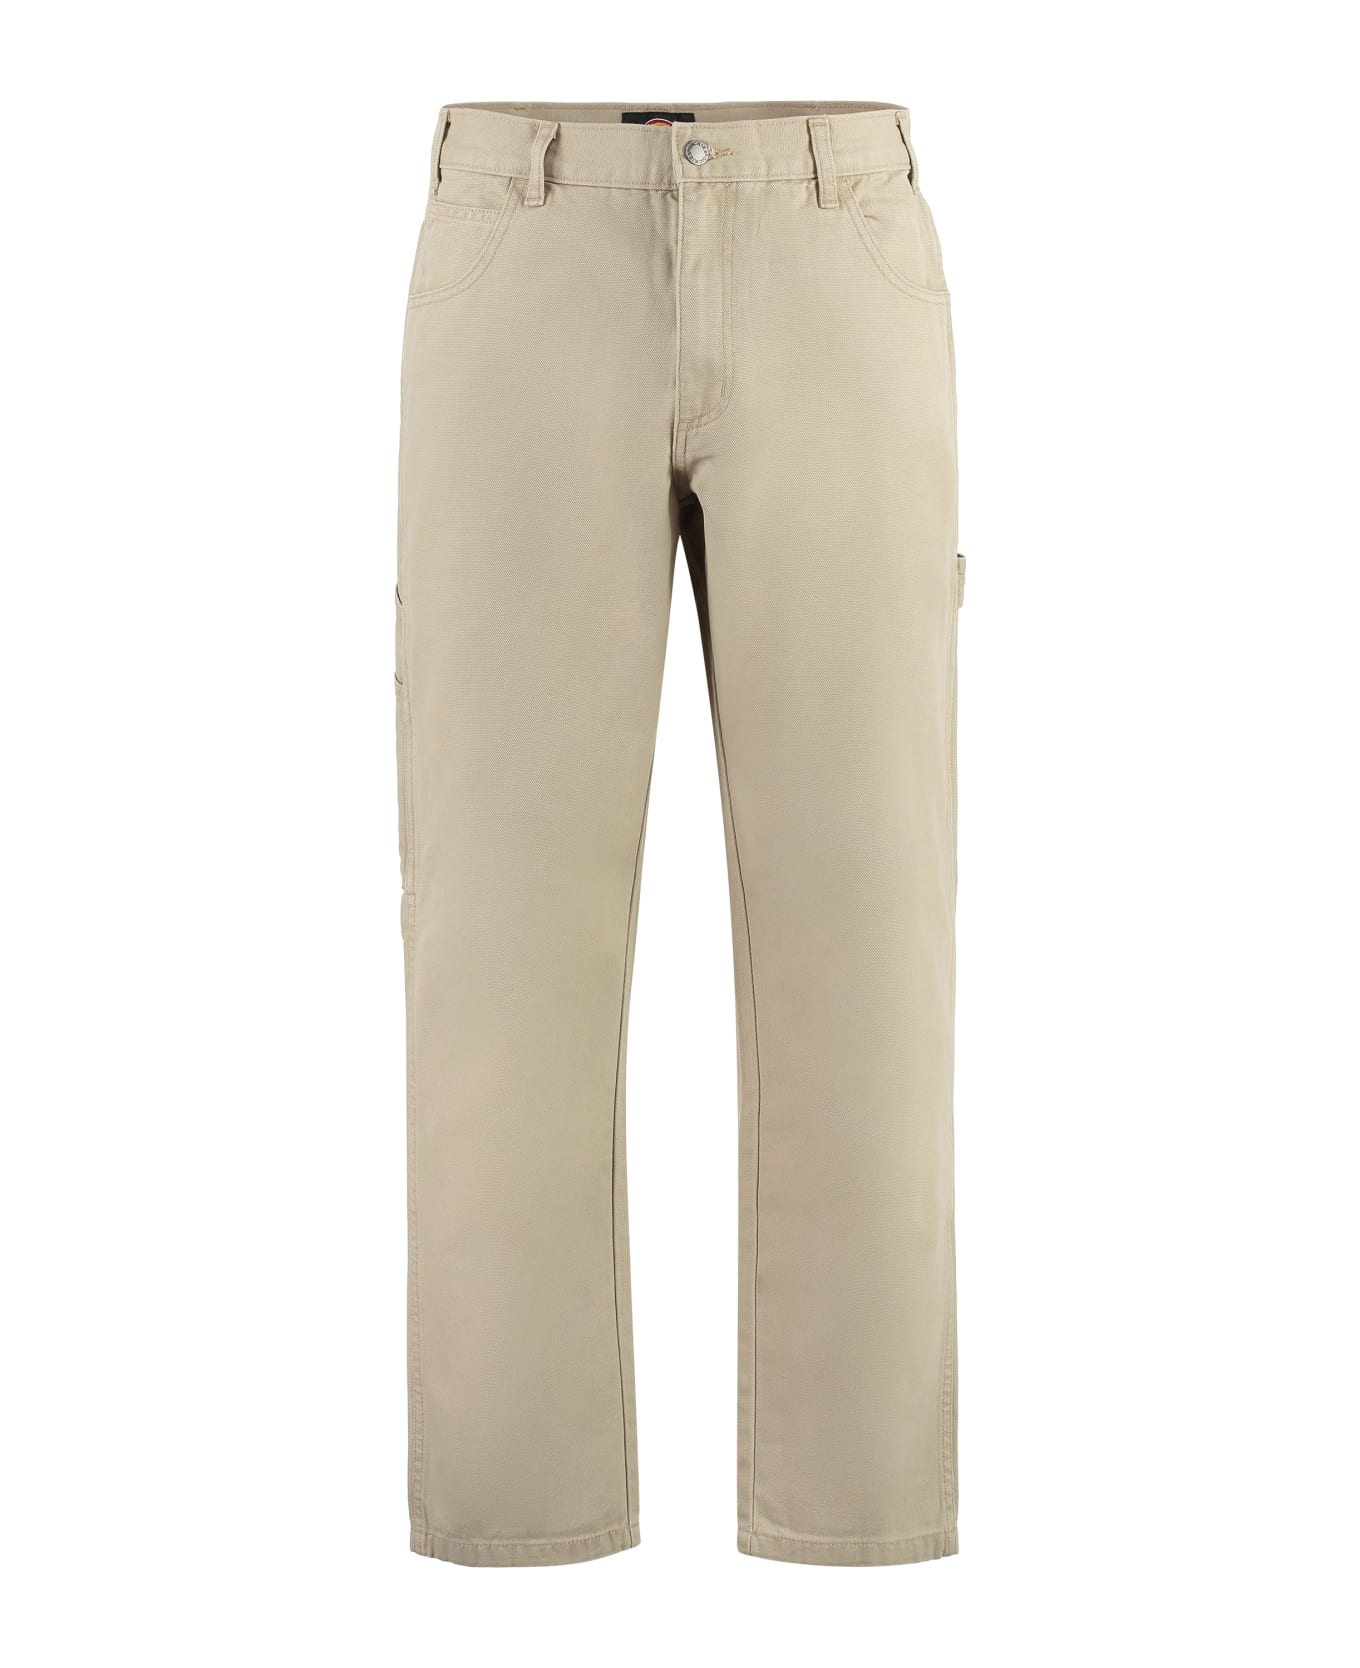 Dickies Cotton Trousers - Beige